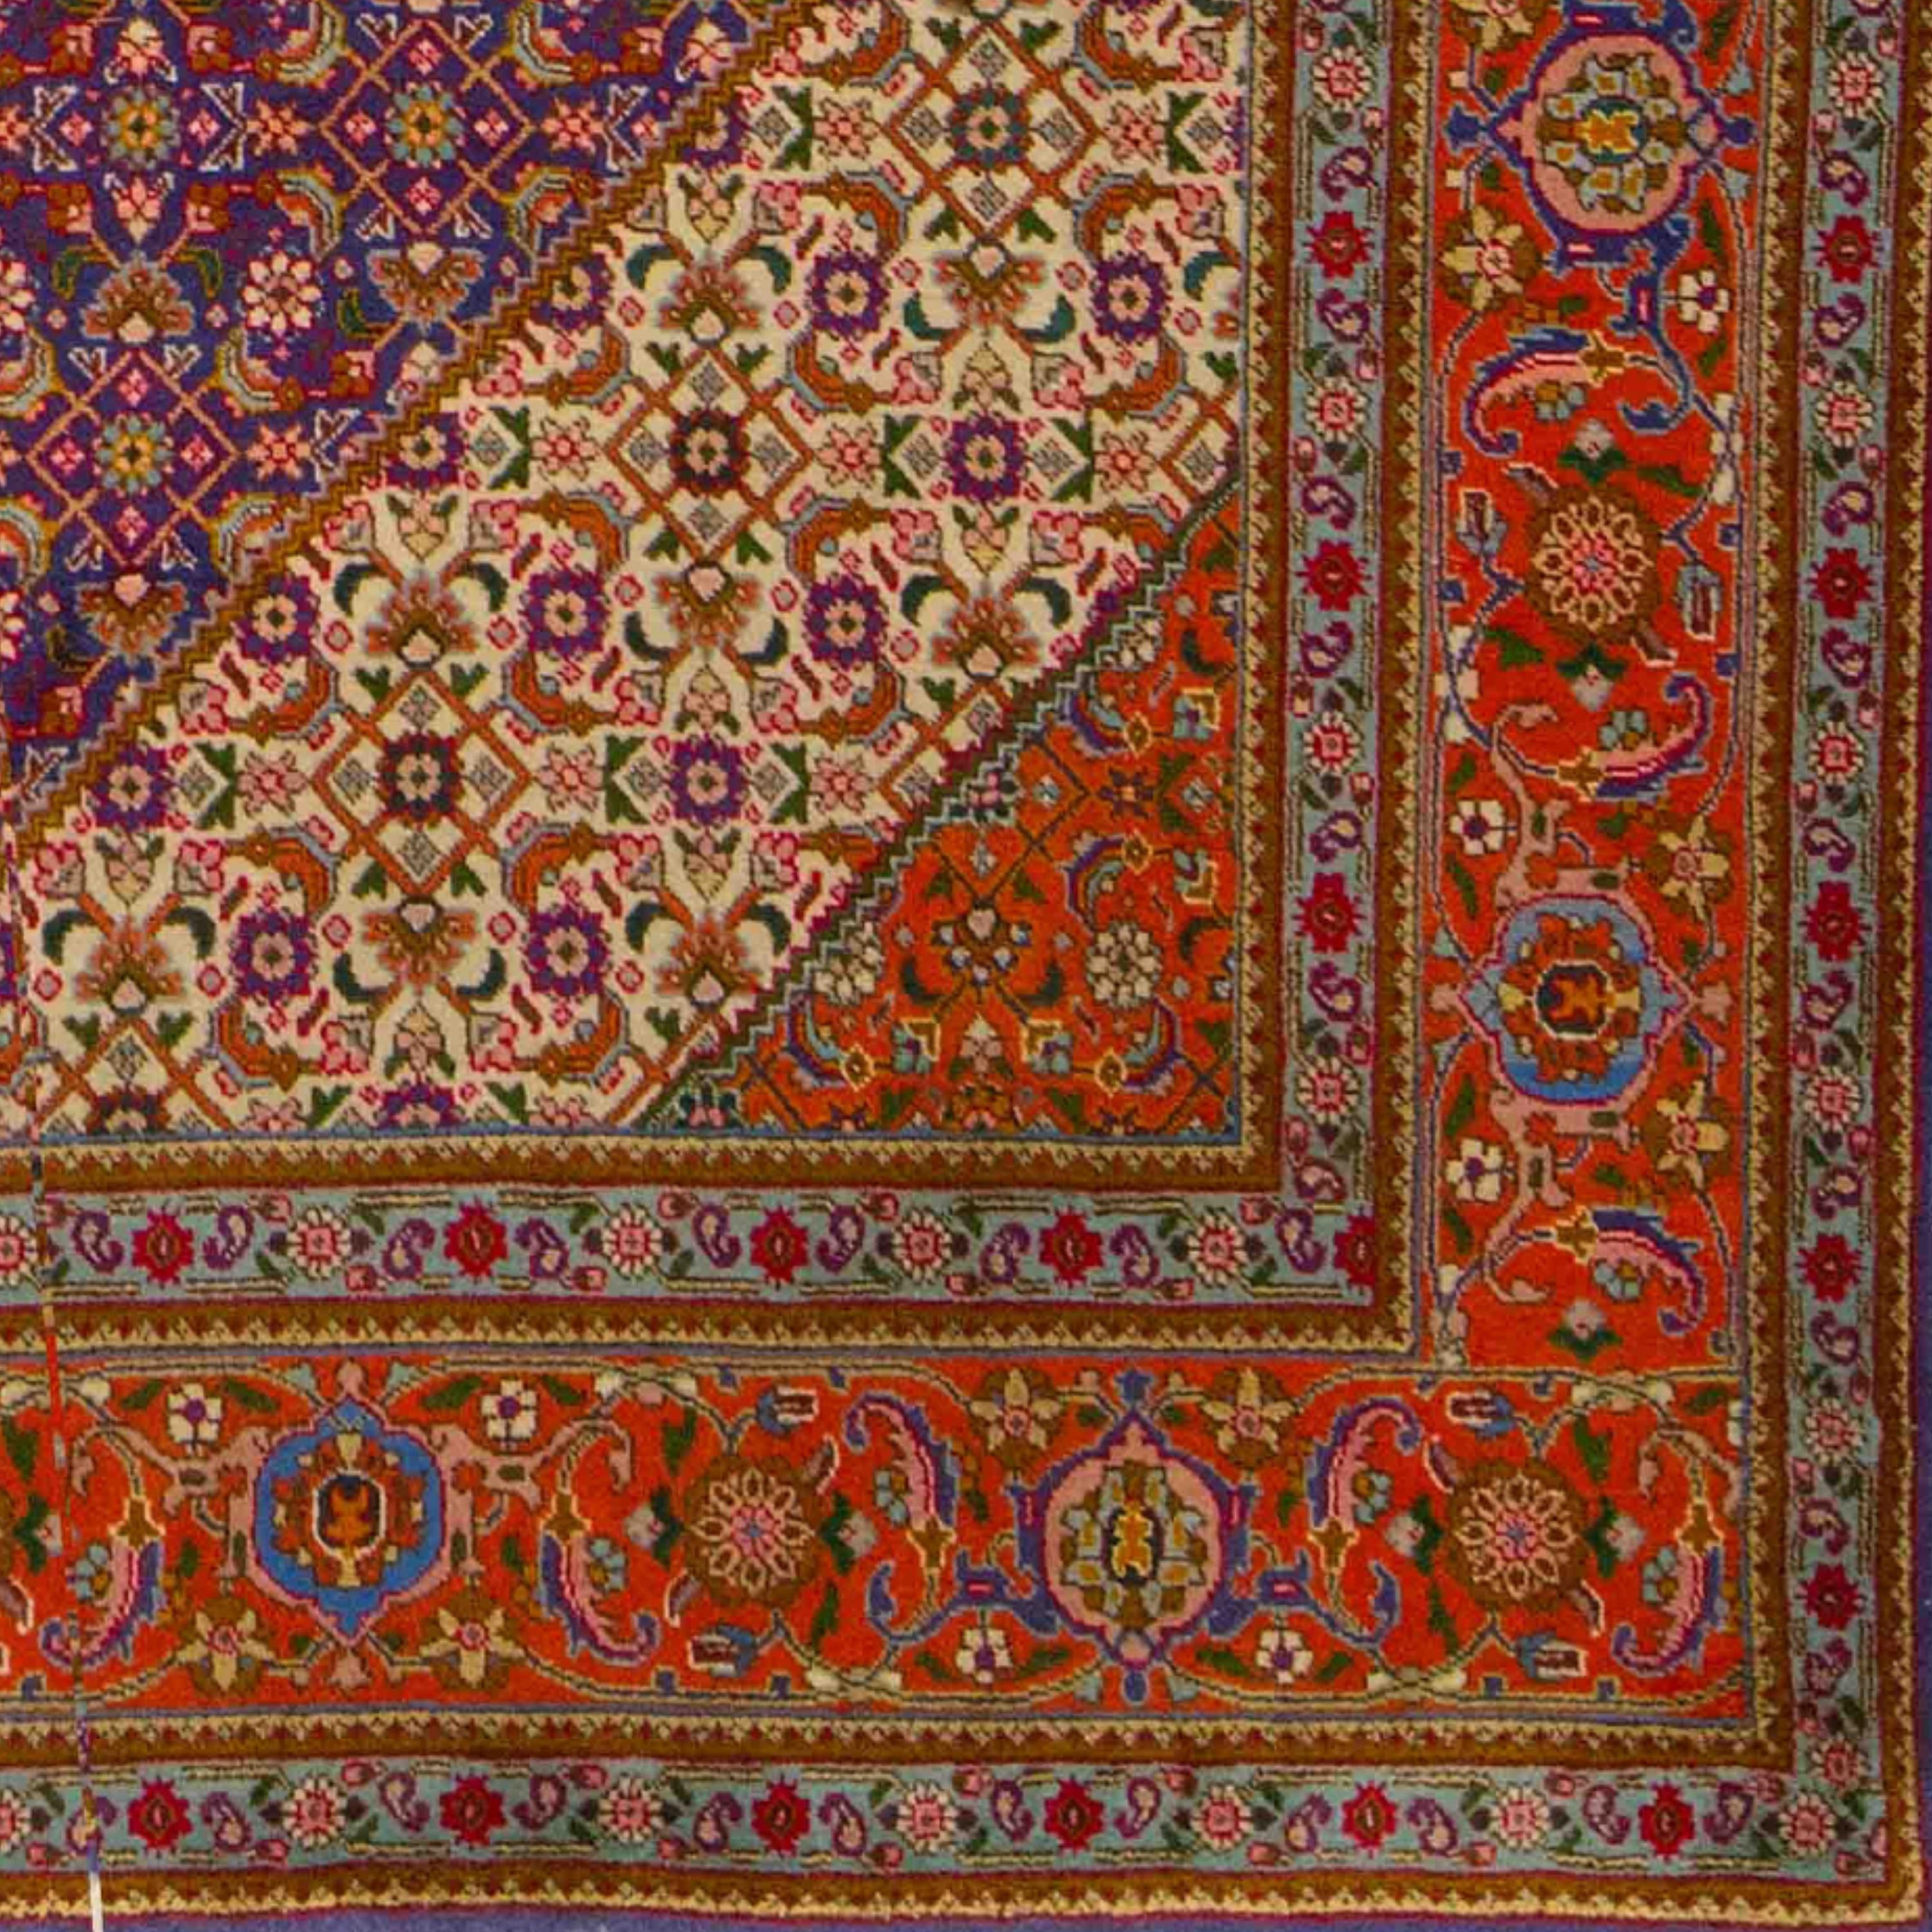 18th Century Antique Tabriz Rug - Late of 19th Century Tebriz Rug, Antique Tabriz Rug